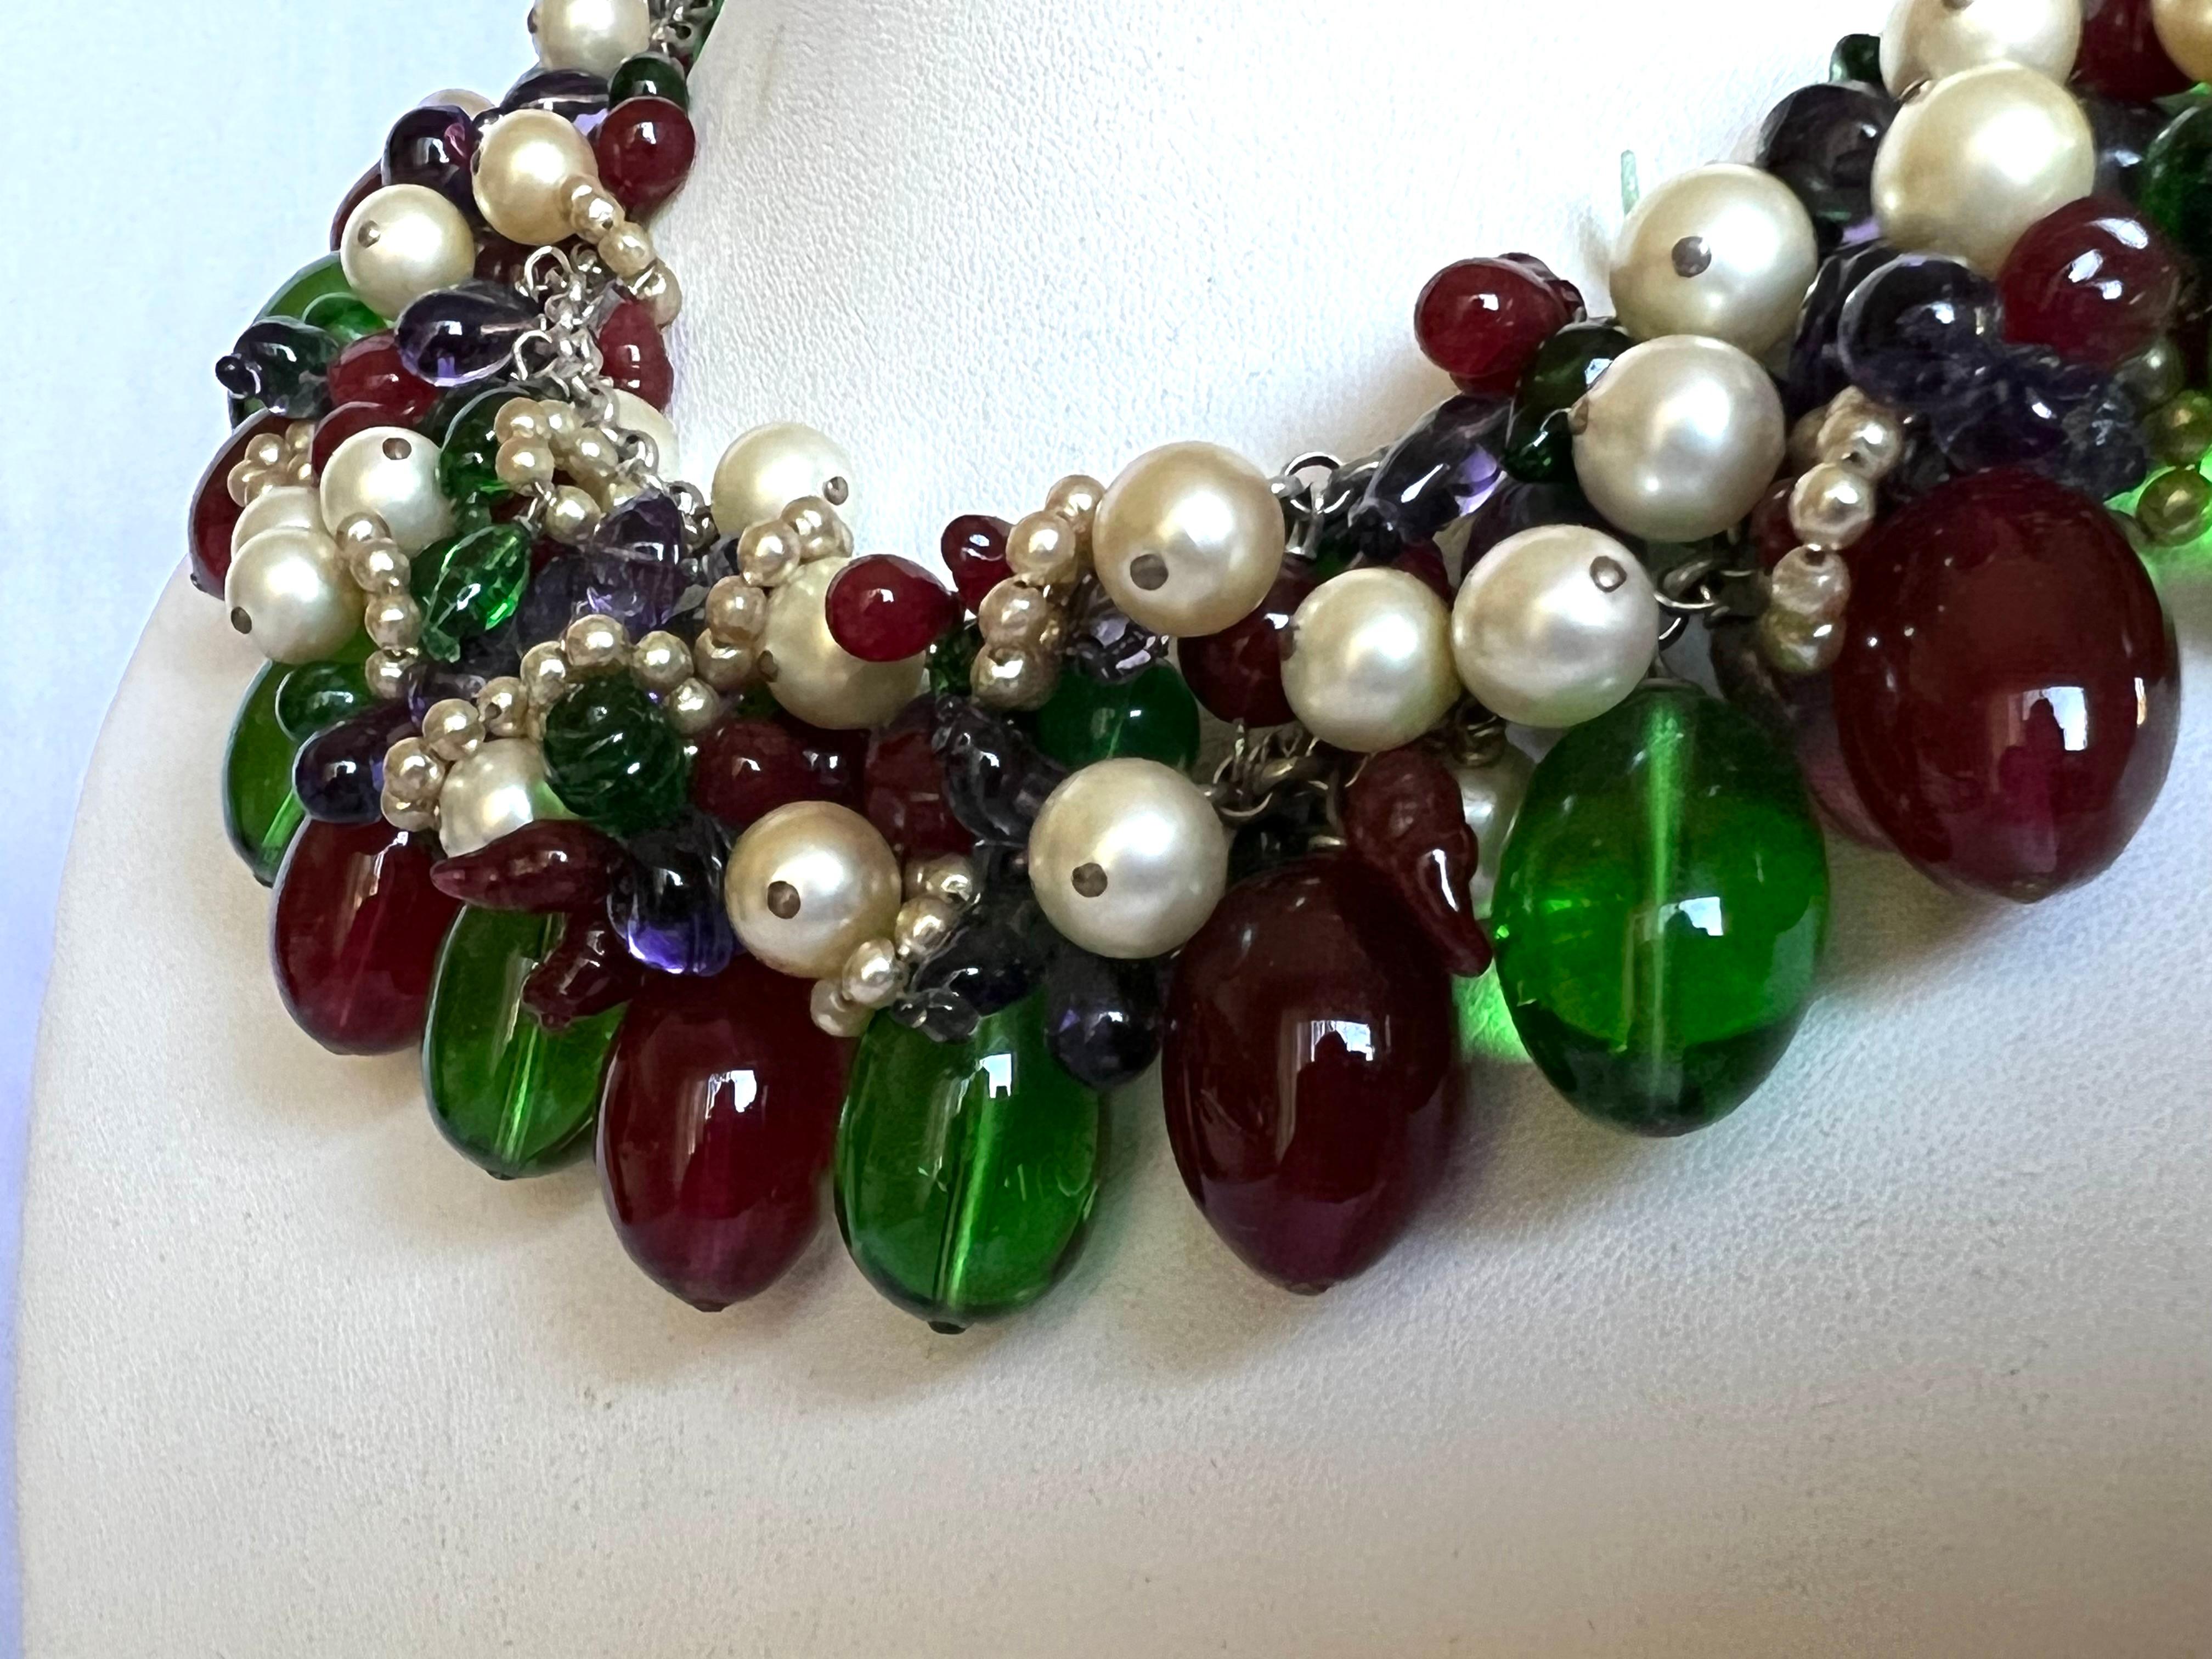 Scarce vintage Coco Chanel beaded statement necklace. The necklace is comprised of large blue, green, and red glass beads which are accented by a mixture of faux glass pearls. The design of this necklace is a classic 1930s design originated by